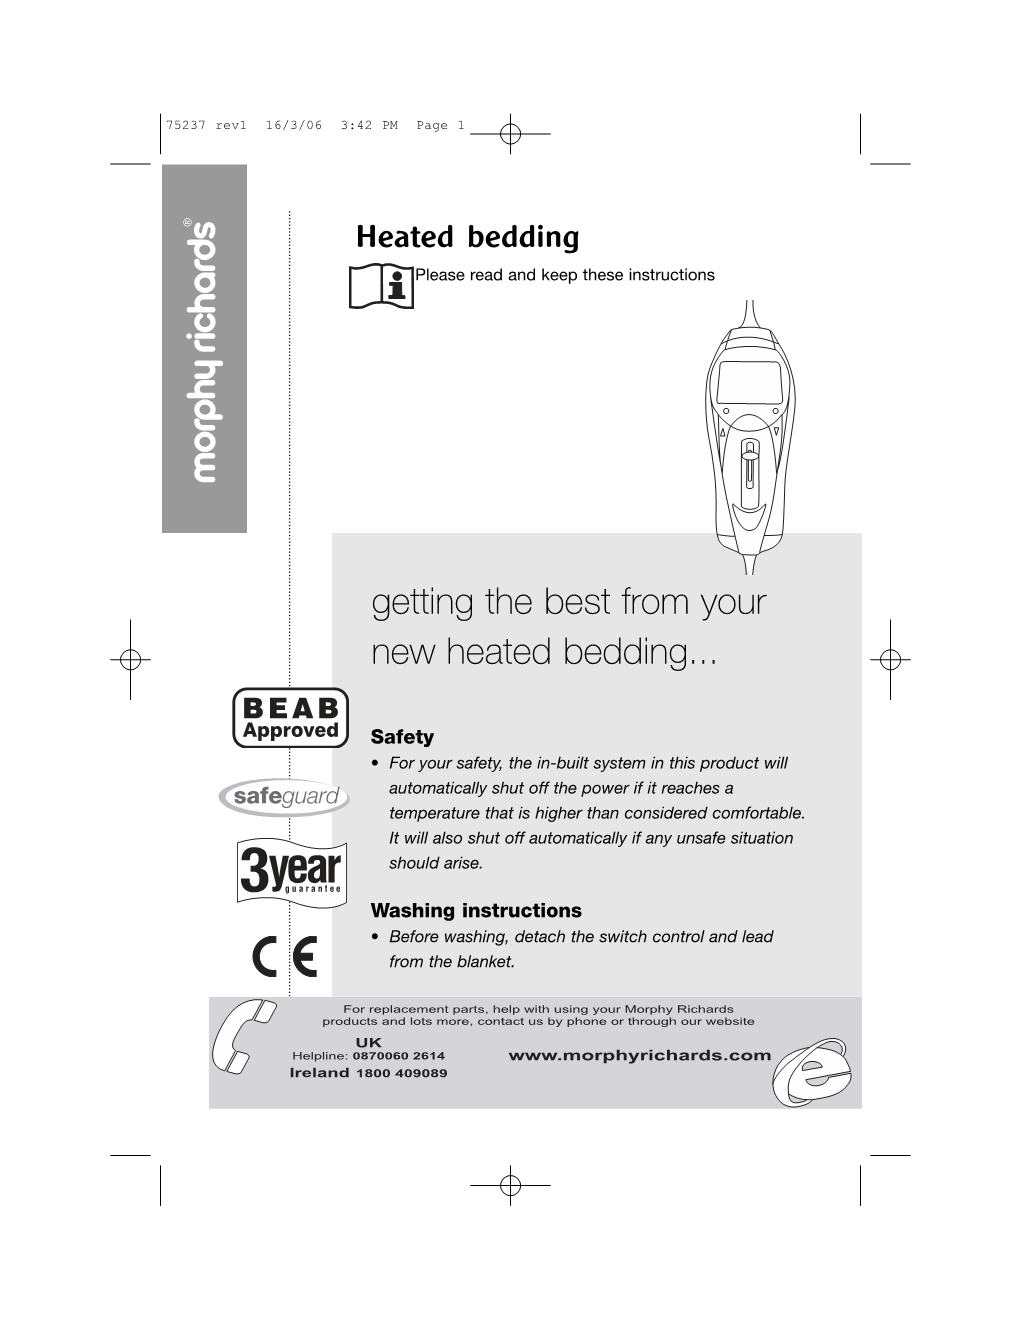 Getting the Best from Your New Heated Bedding